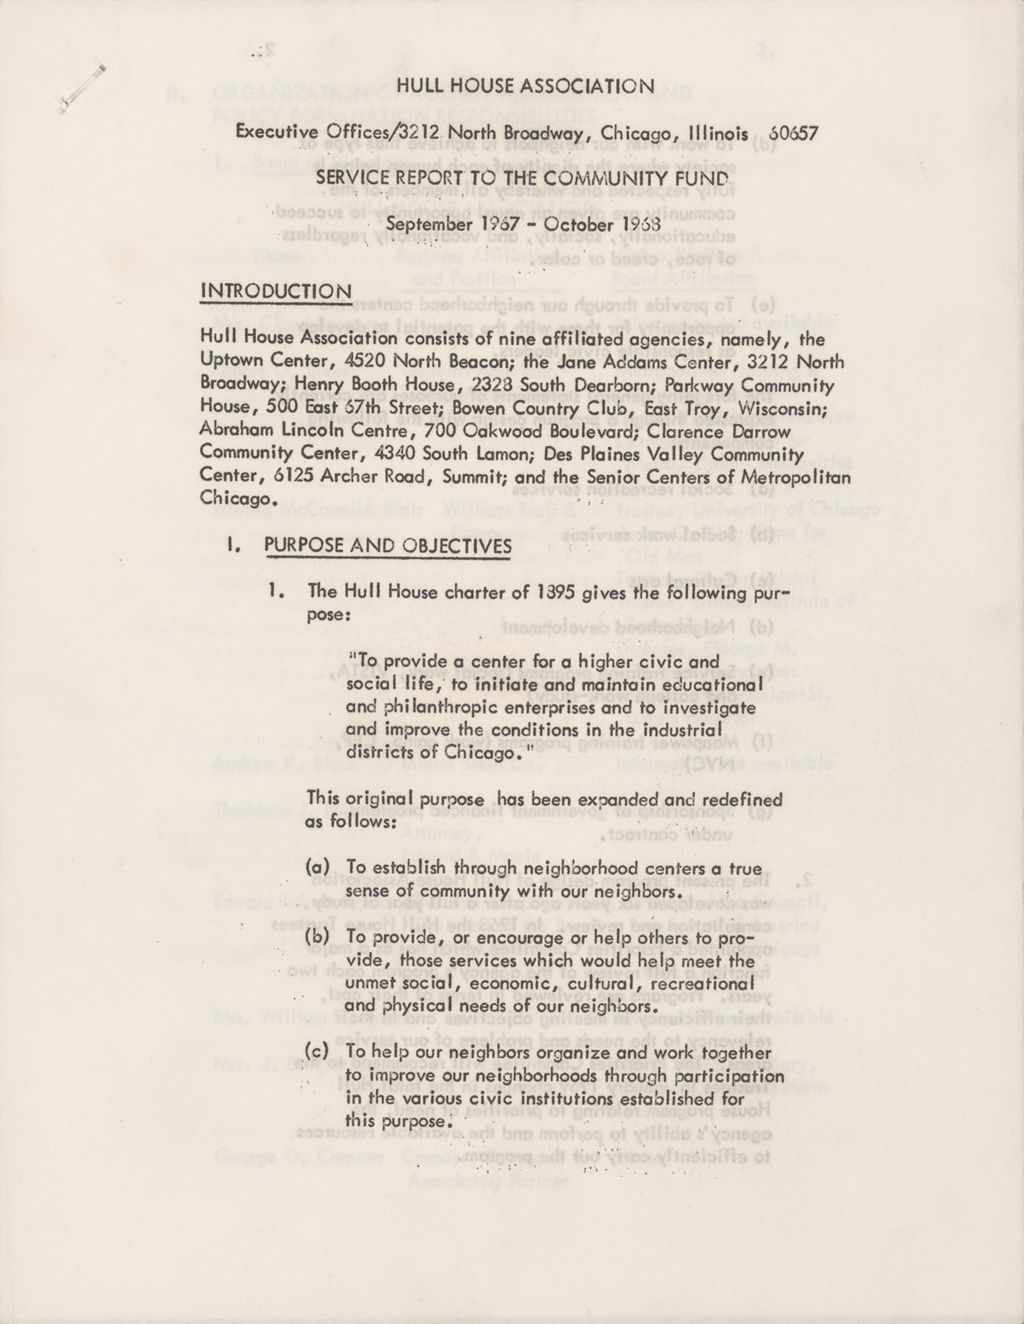 Miniature of Hull House Association, Service Report, 1968